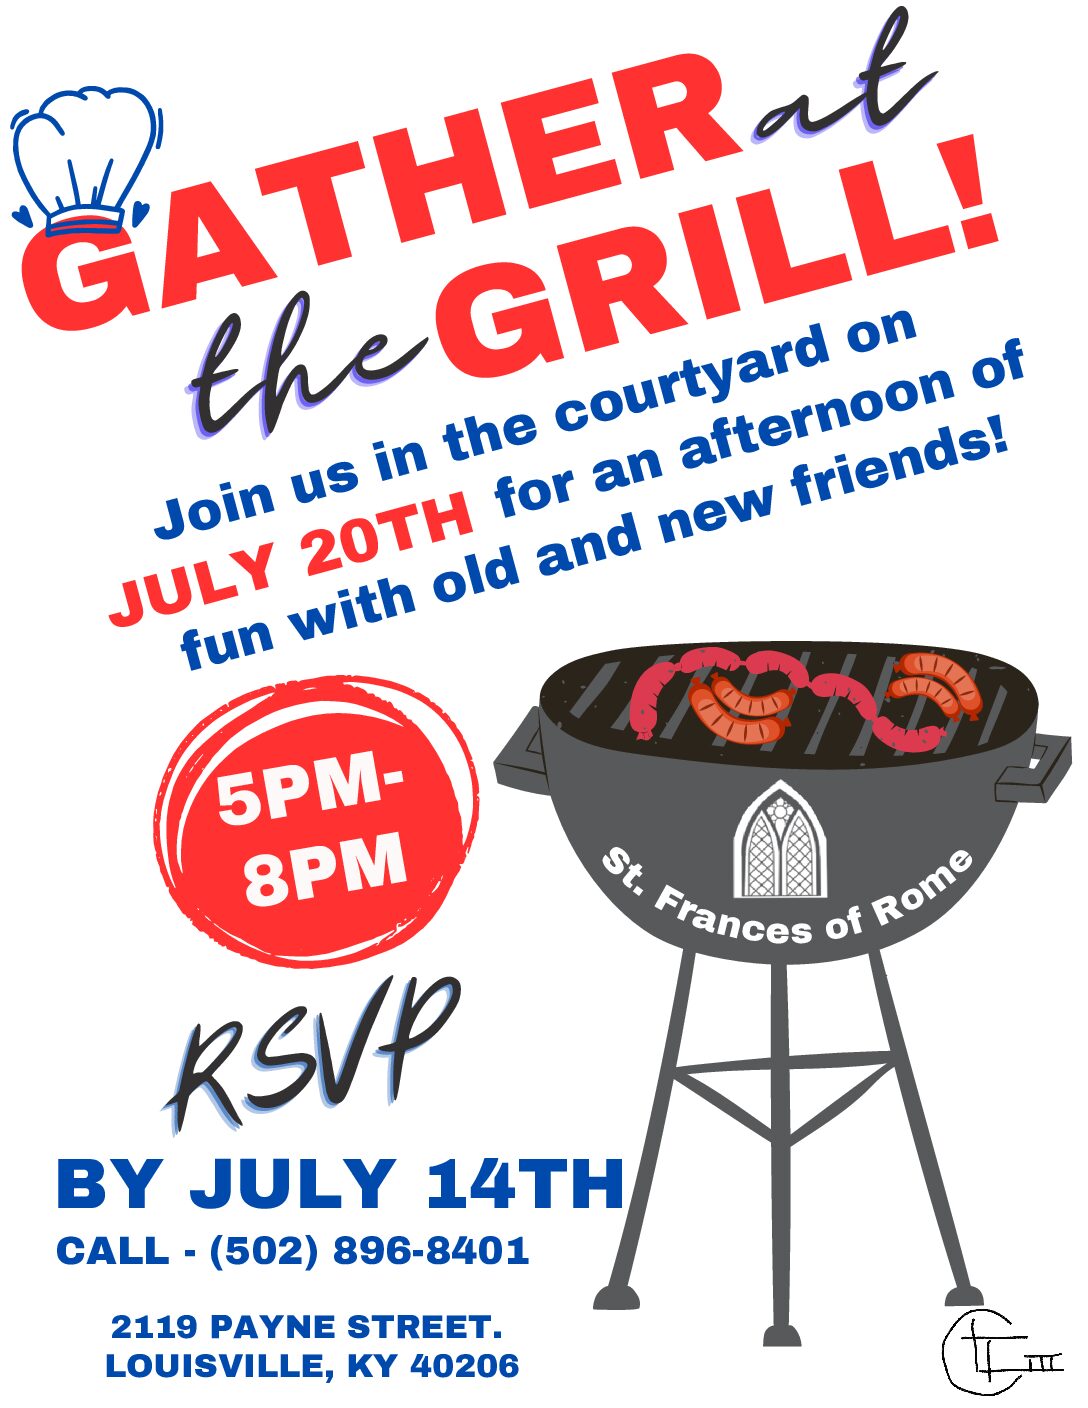 Gather at the Grill Postponed